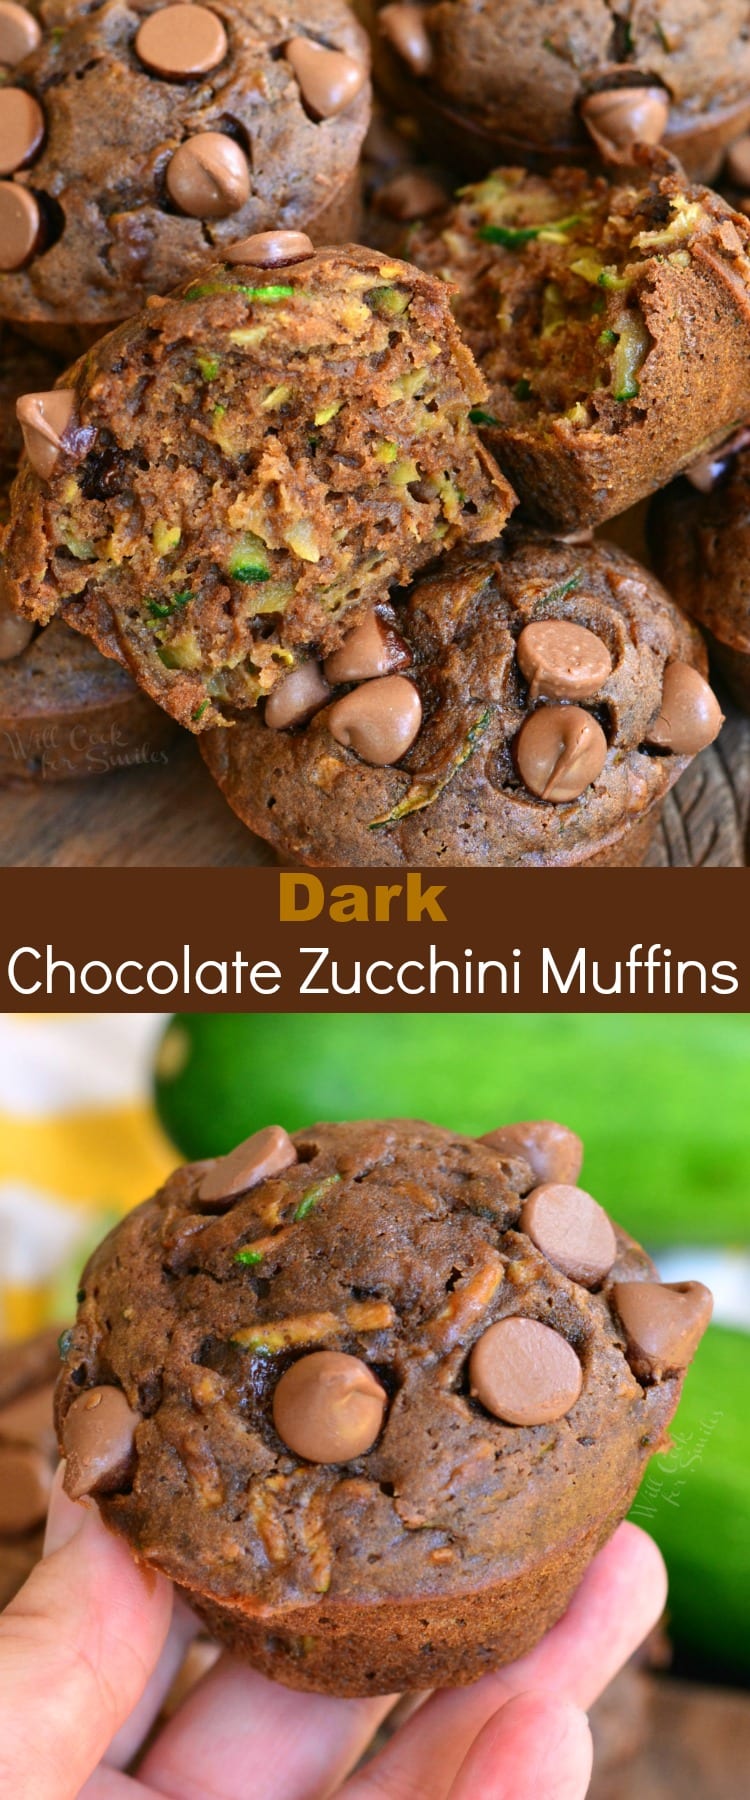 Easy Dark Chocolate Zucchini Muffins make a perfect breakfast, snack, and brunch! It only takes 5 minutes to prep and 20 minutes to bake these rich and moist chocolate zucchini muffins. #zucchini #muffins #chocolate #breakfast #snack #brunch